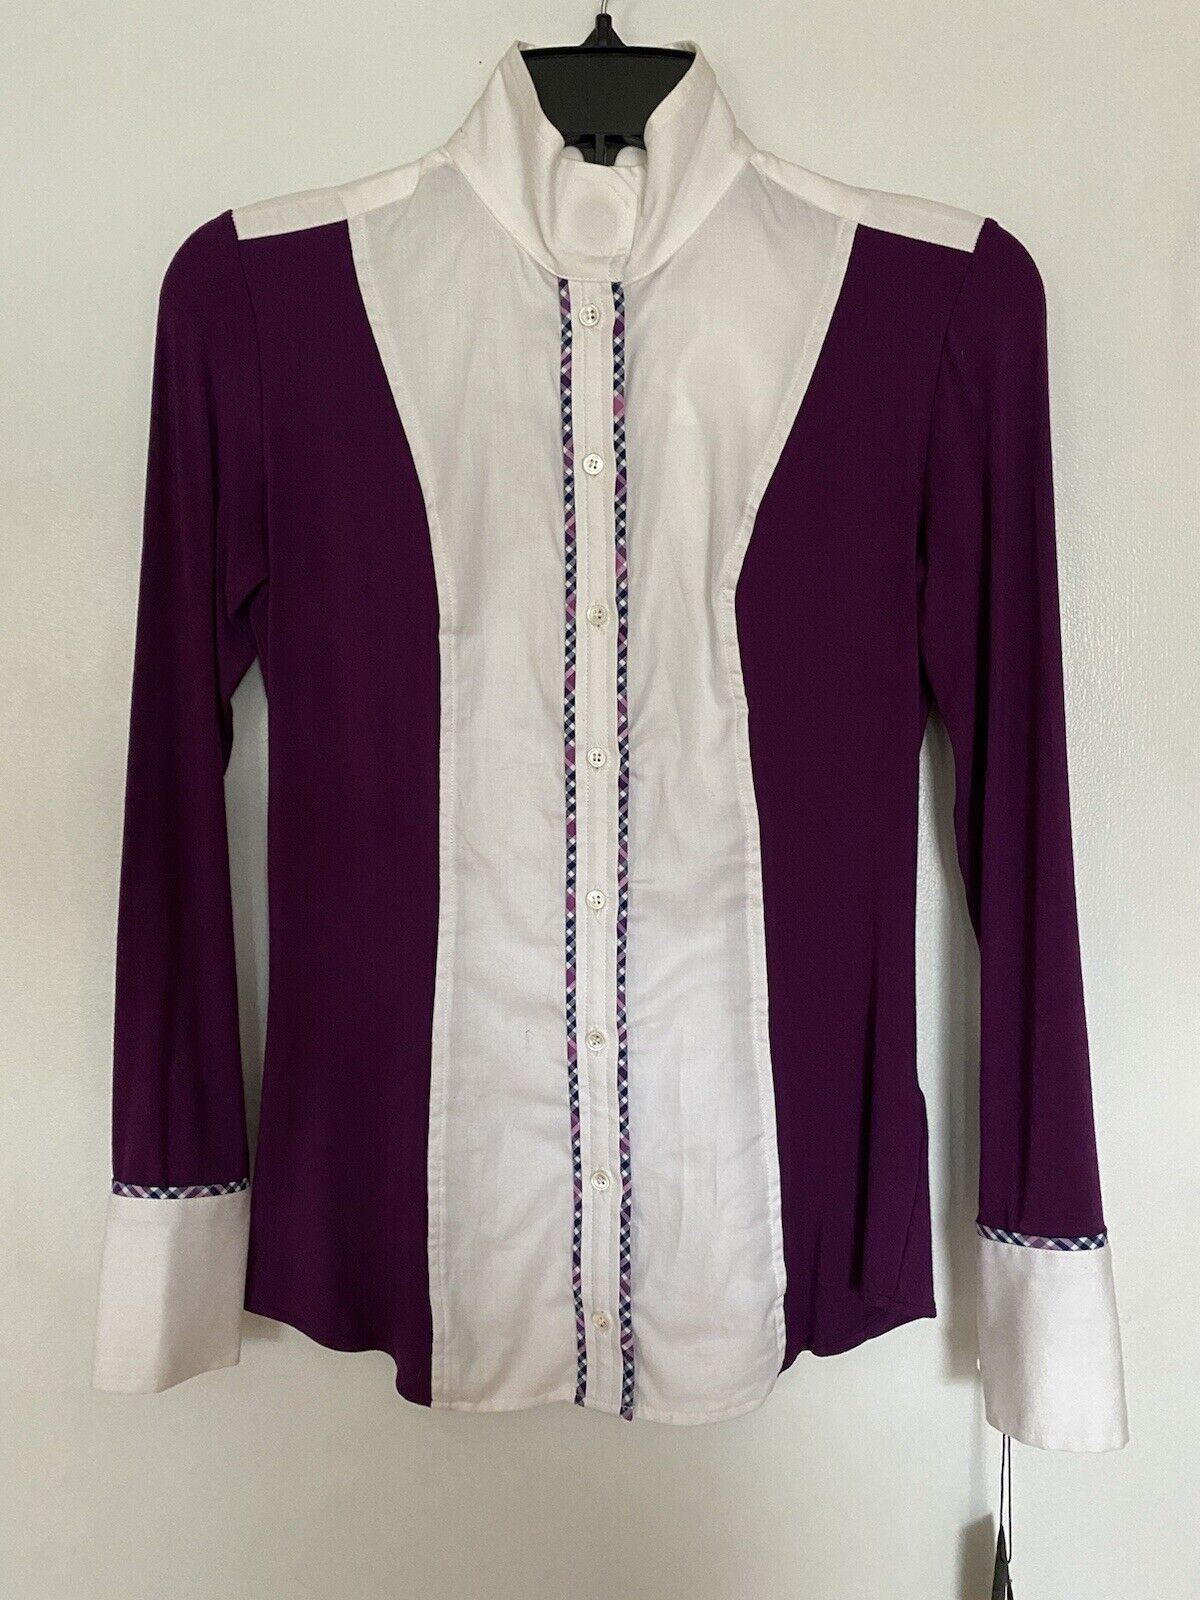 Lefash Show Shirt New With Tags - Size Xs